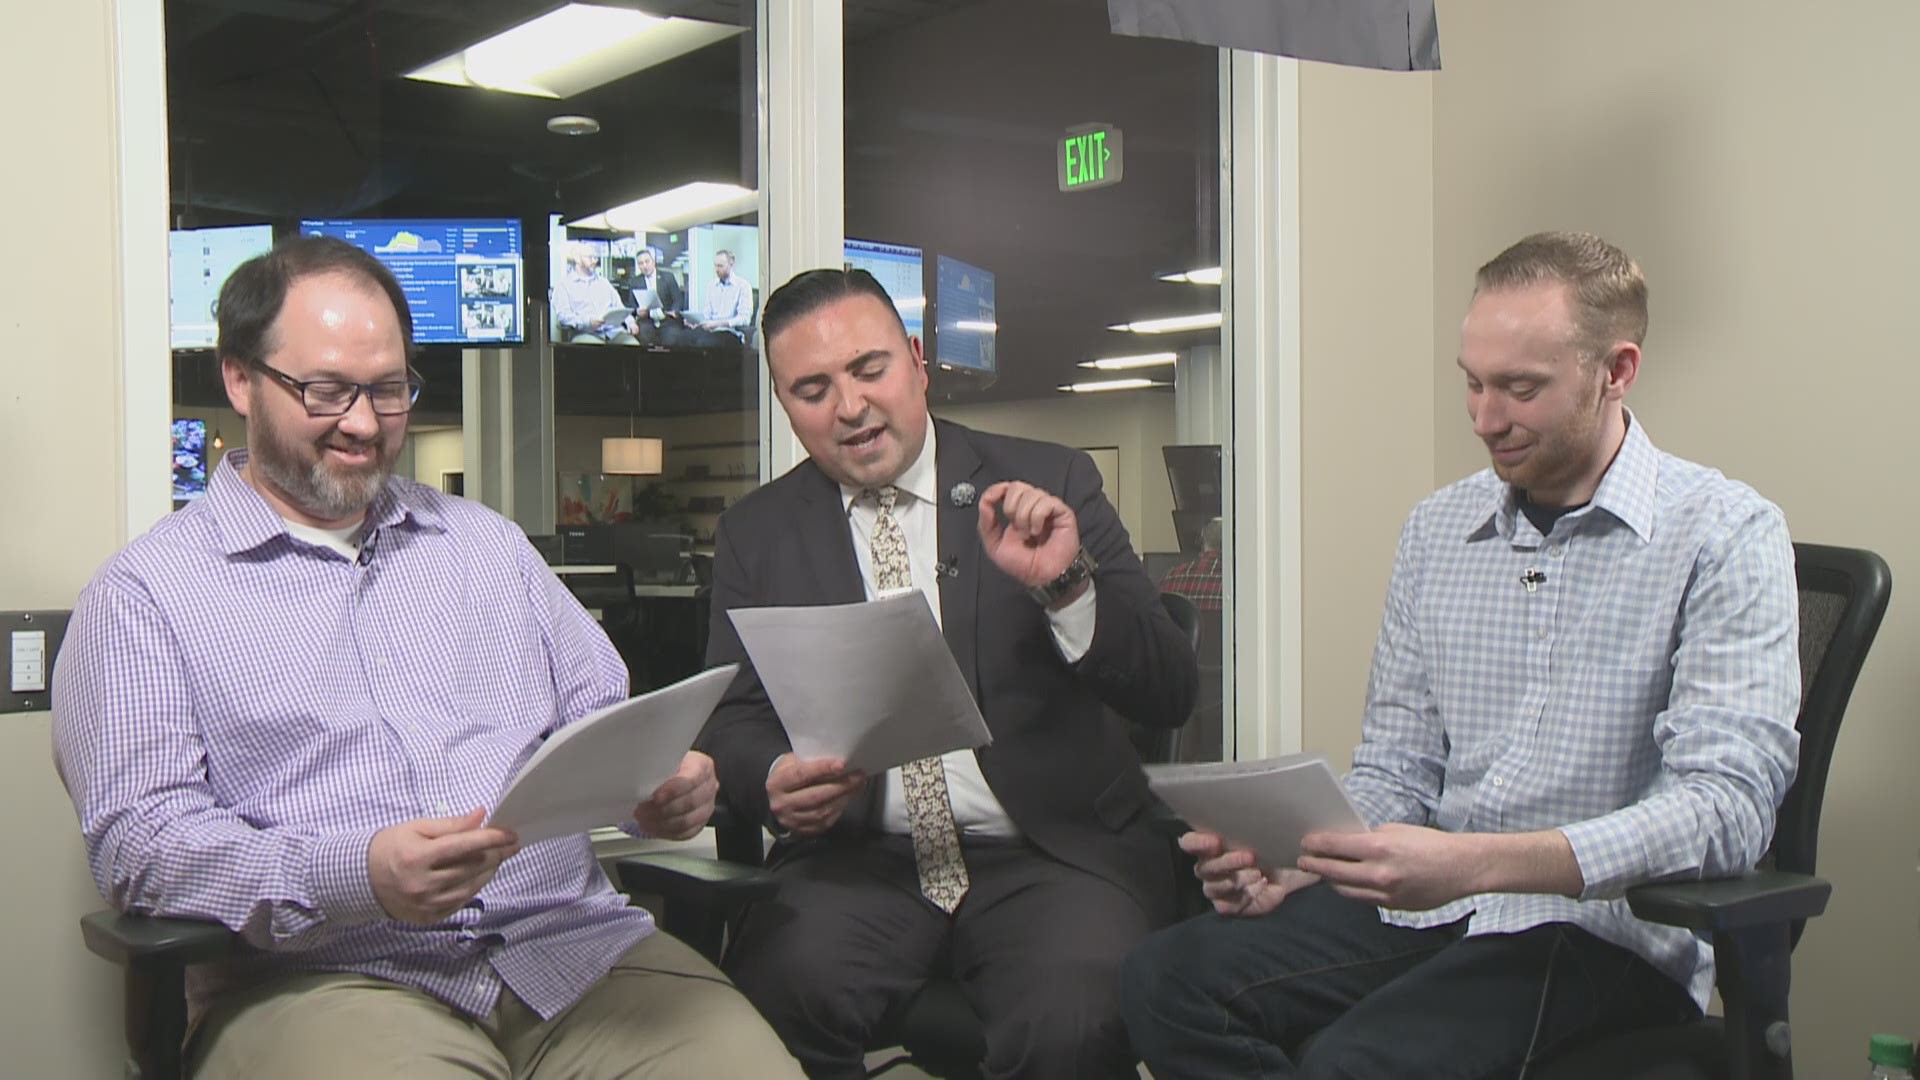 KGW's Jared Cowley, Orlando Sanchez and Nate Hanson talk about what they think the Blazers will do before the February 8 trade deadline.